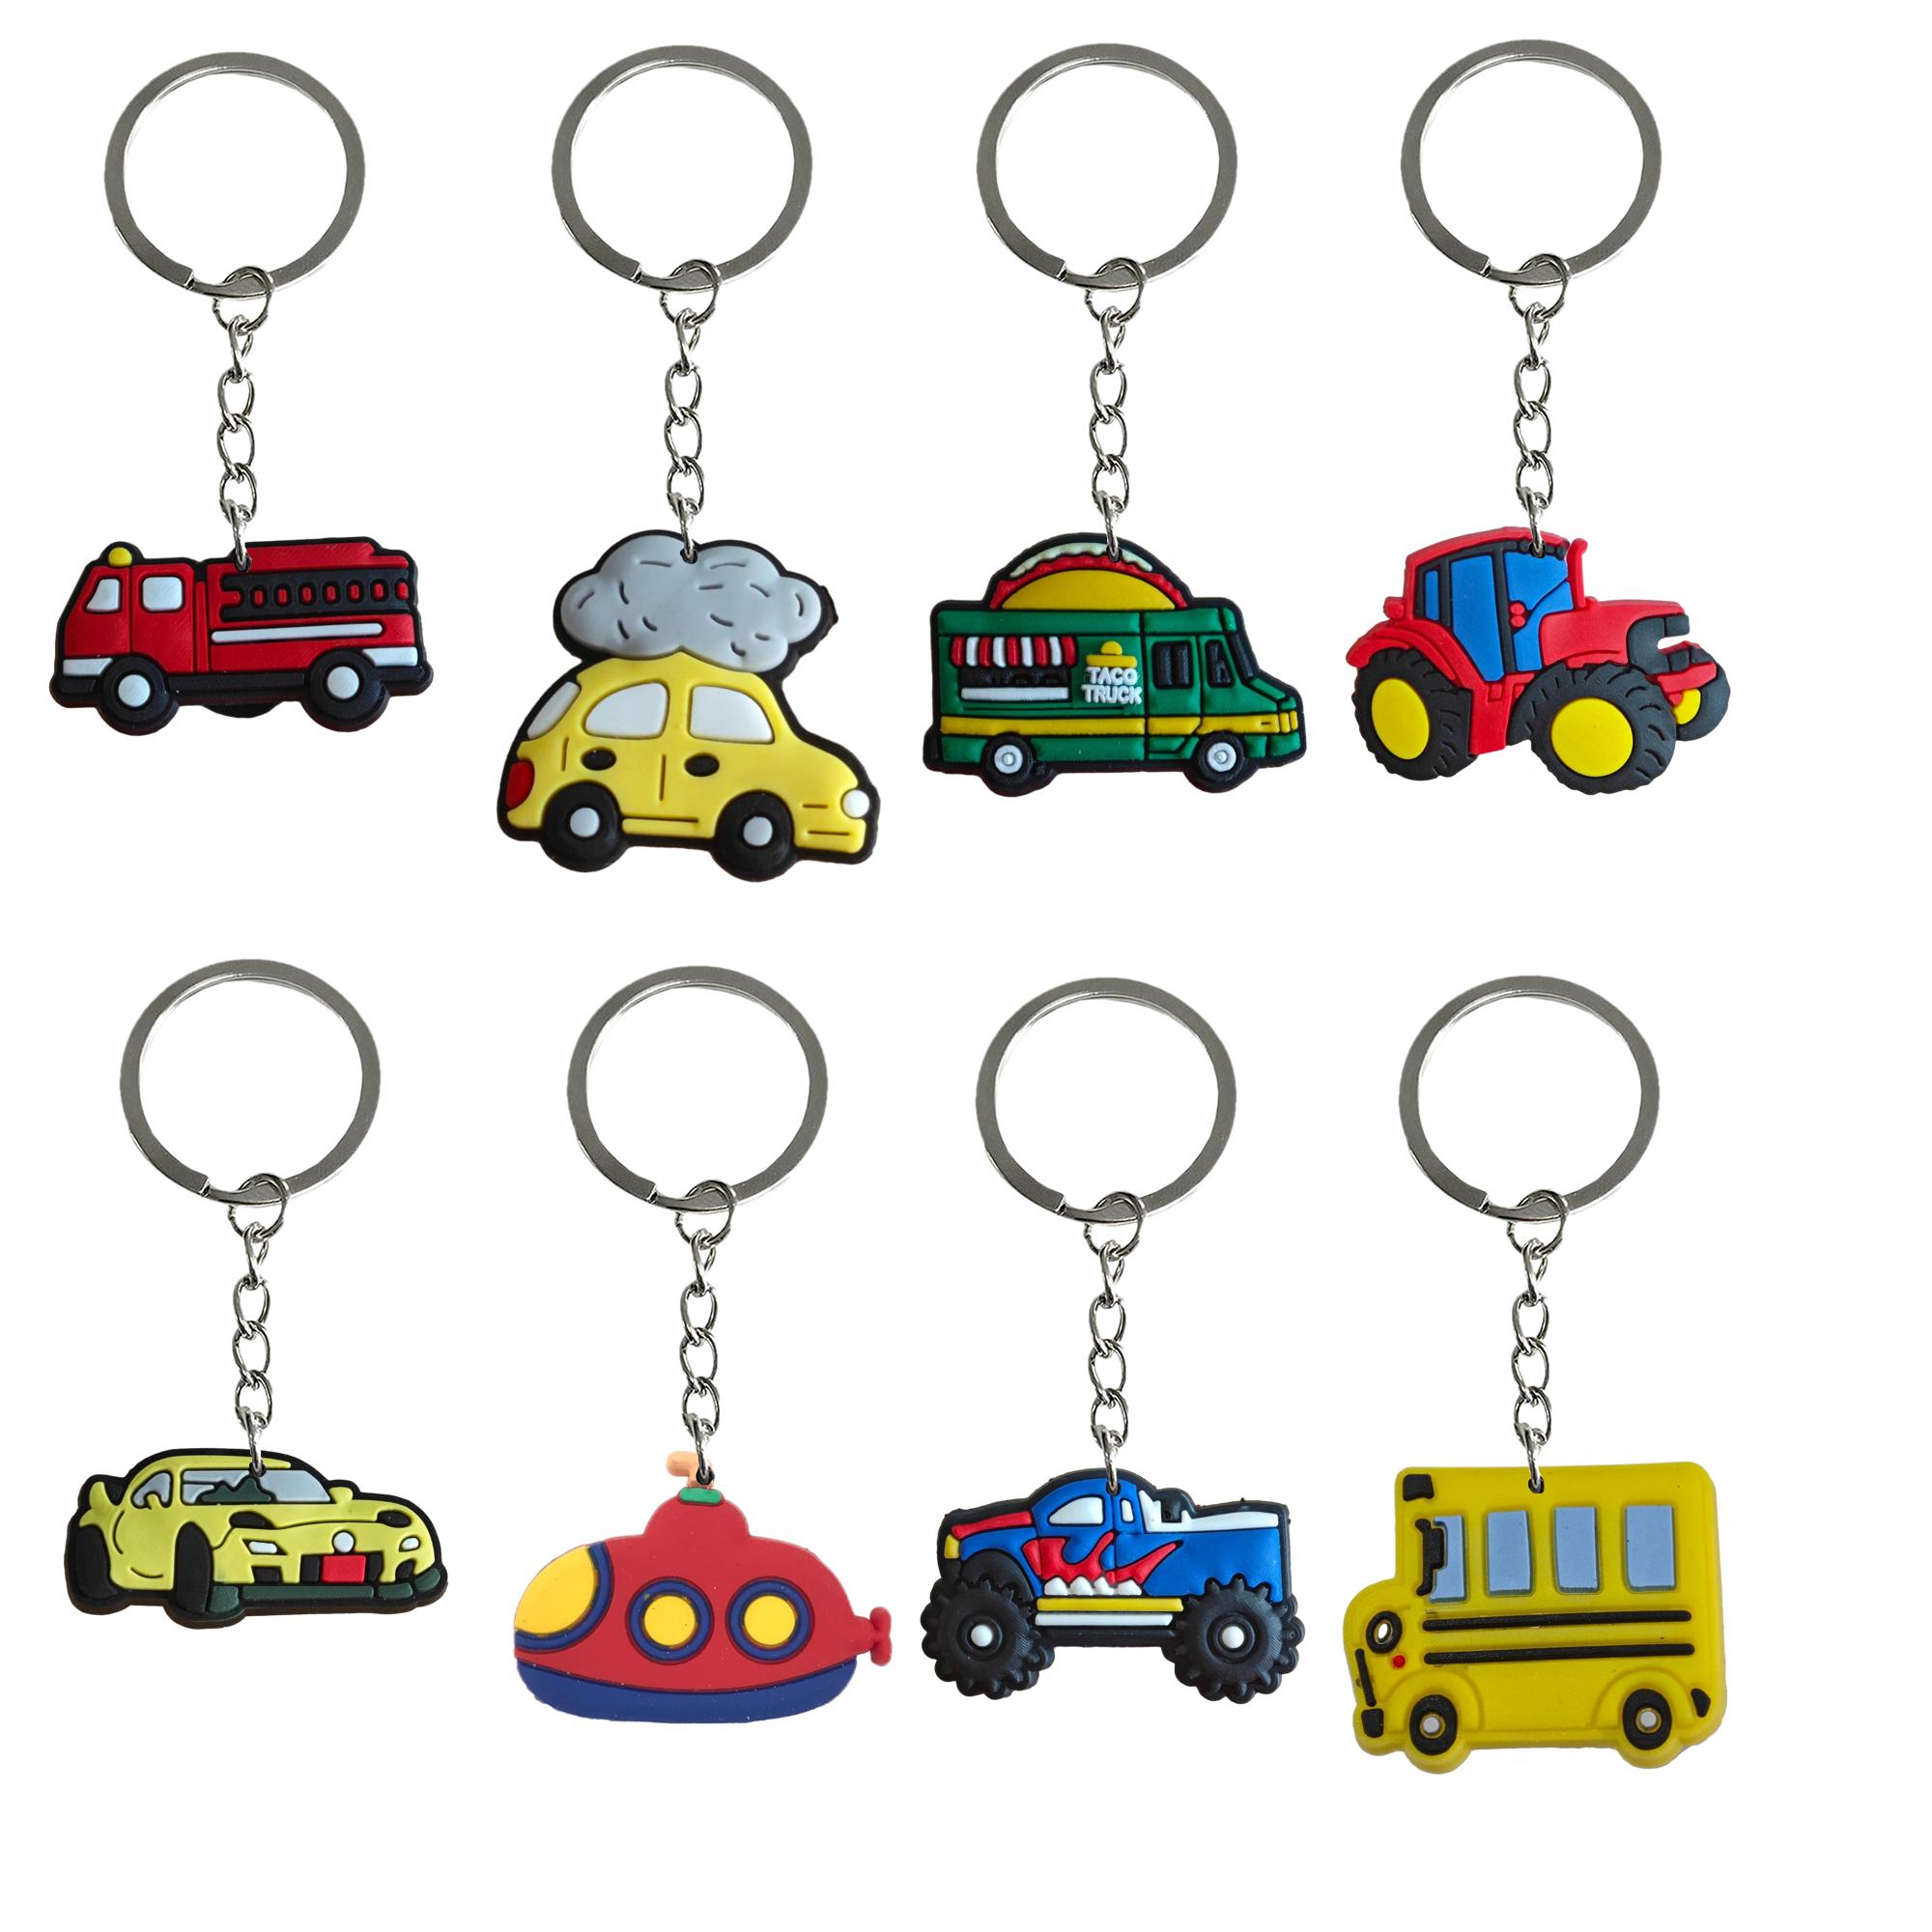 Cartoon Accessories Transportation 1 Keychain Keychains For Backpack Key Chain Kid Boy Girl Party Favors Gift Boys Keyring Suitable Sc Otfsi